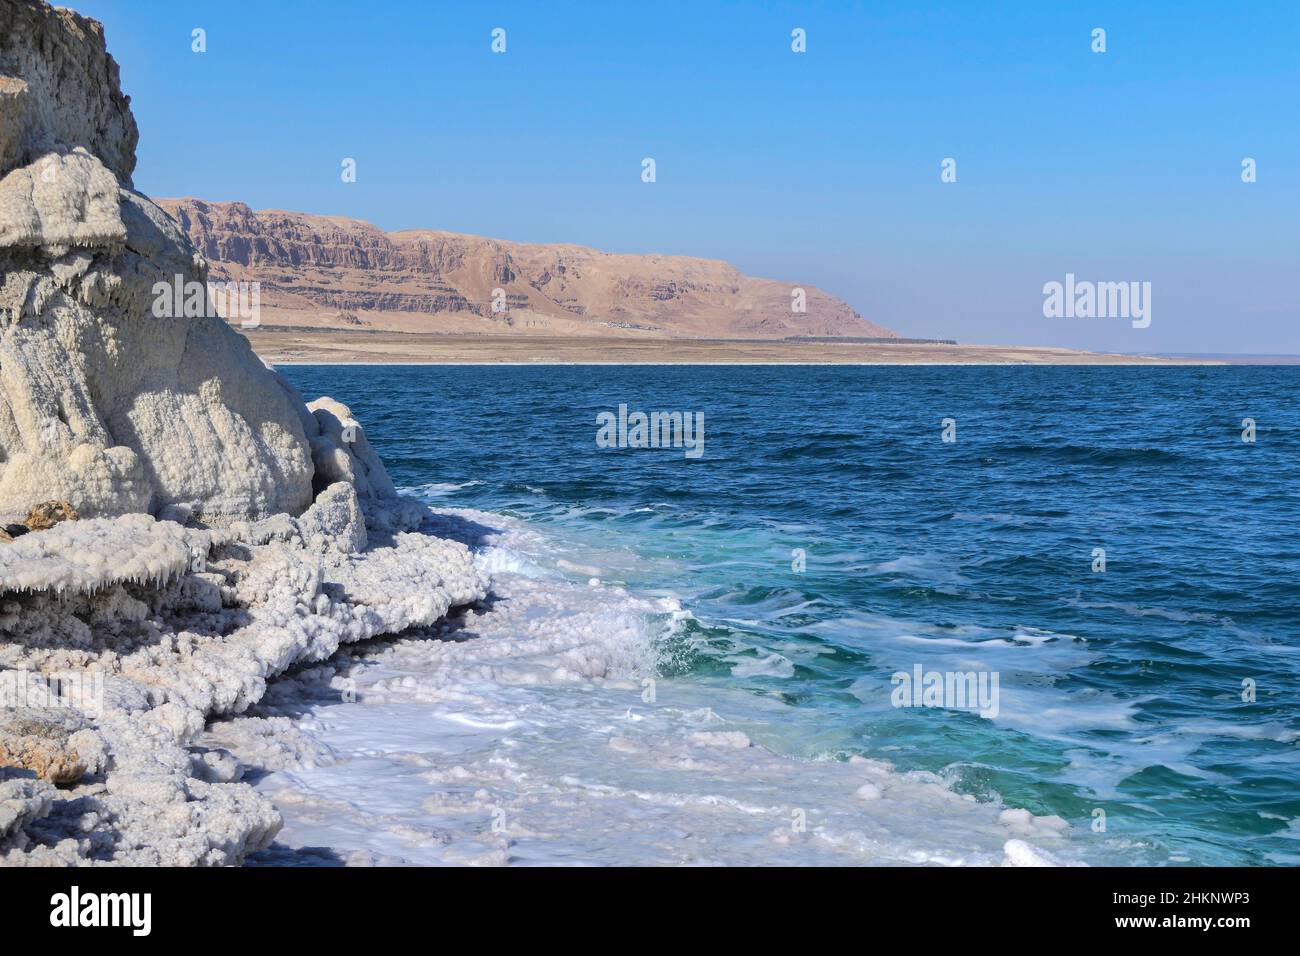 View of the mountains across the waters of the Dead Sea from the shore covered with salt formations. Stock Photo